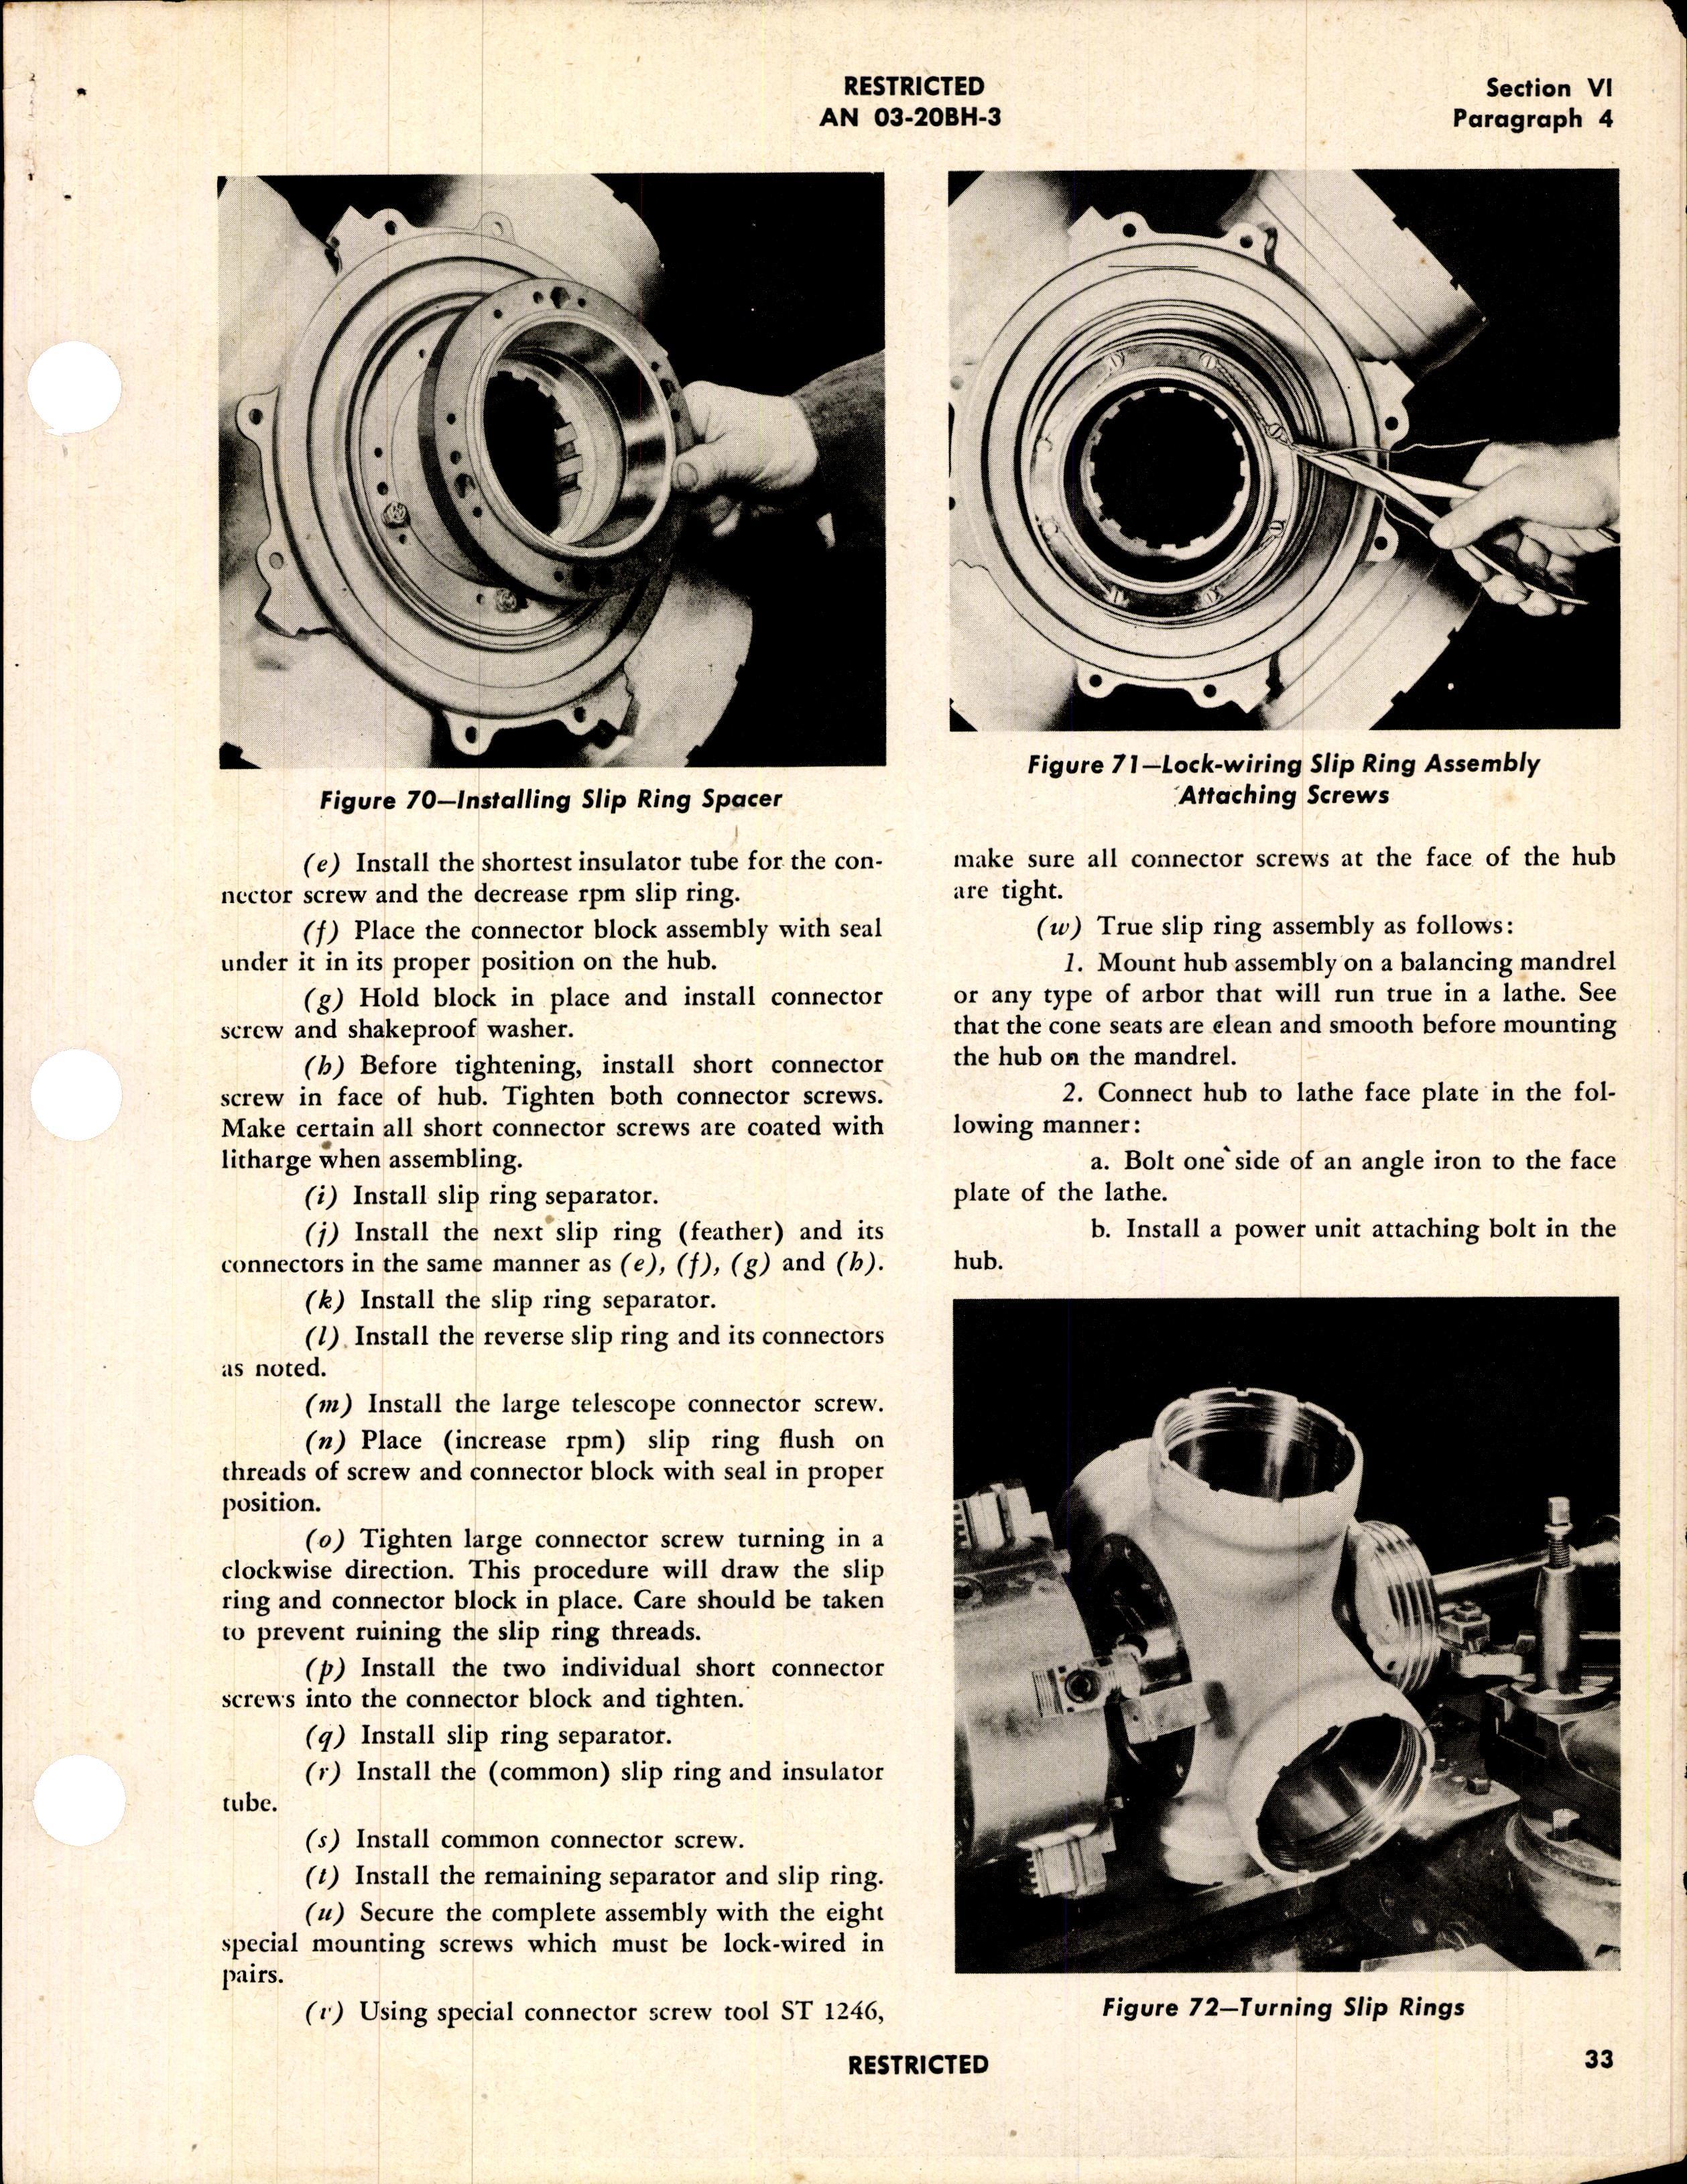 Sample page 5 from AirCorps Library document: Handbook of Instructions with Parts Catalog for Model C542S-B Electric Propellers- Hollow Steel